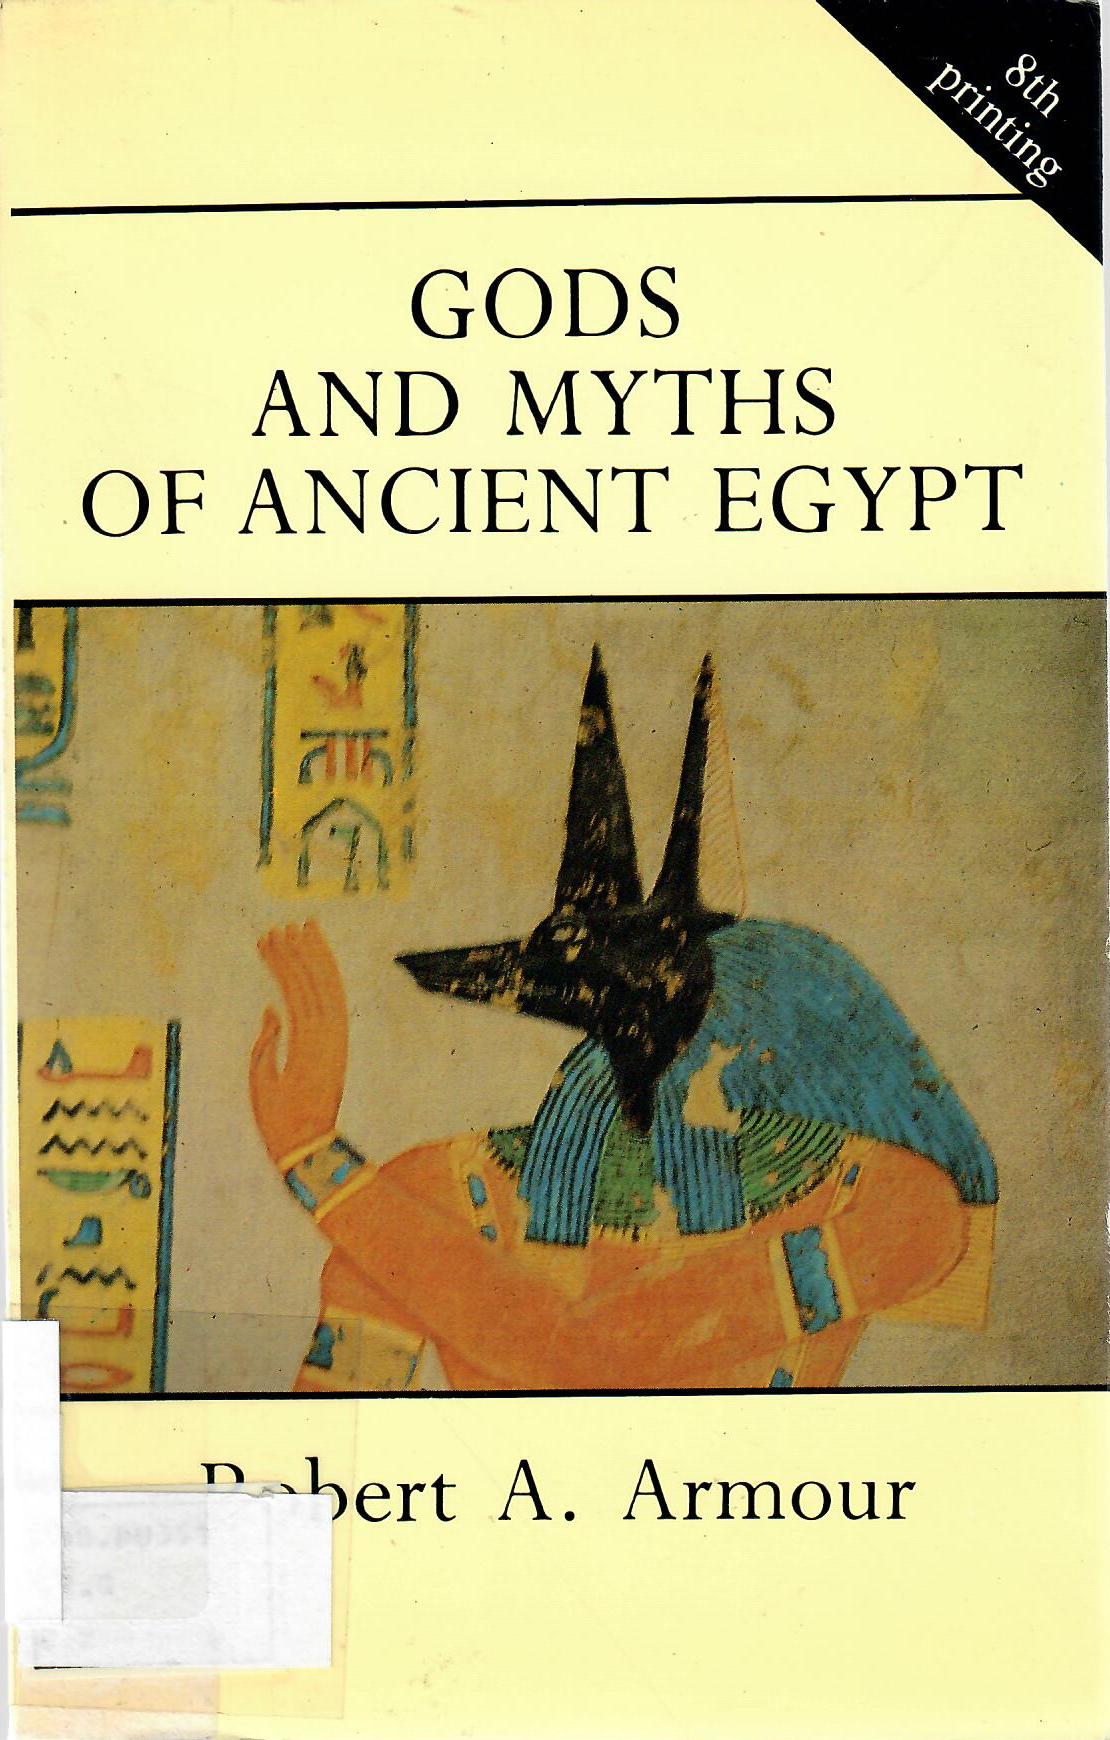 GODS AND MYTHS OF ANCIENT EGYPT